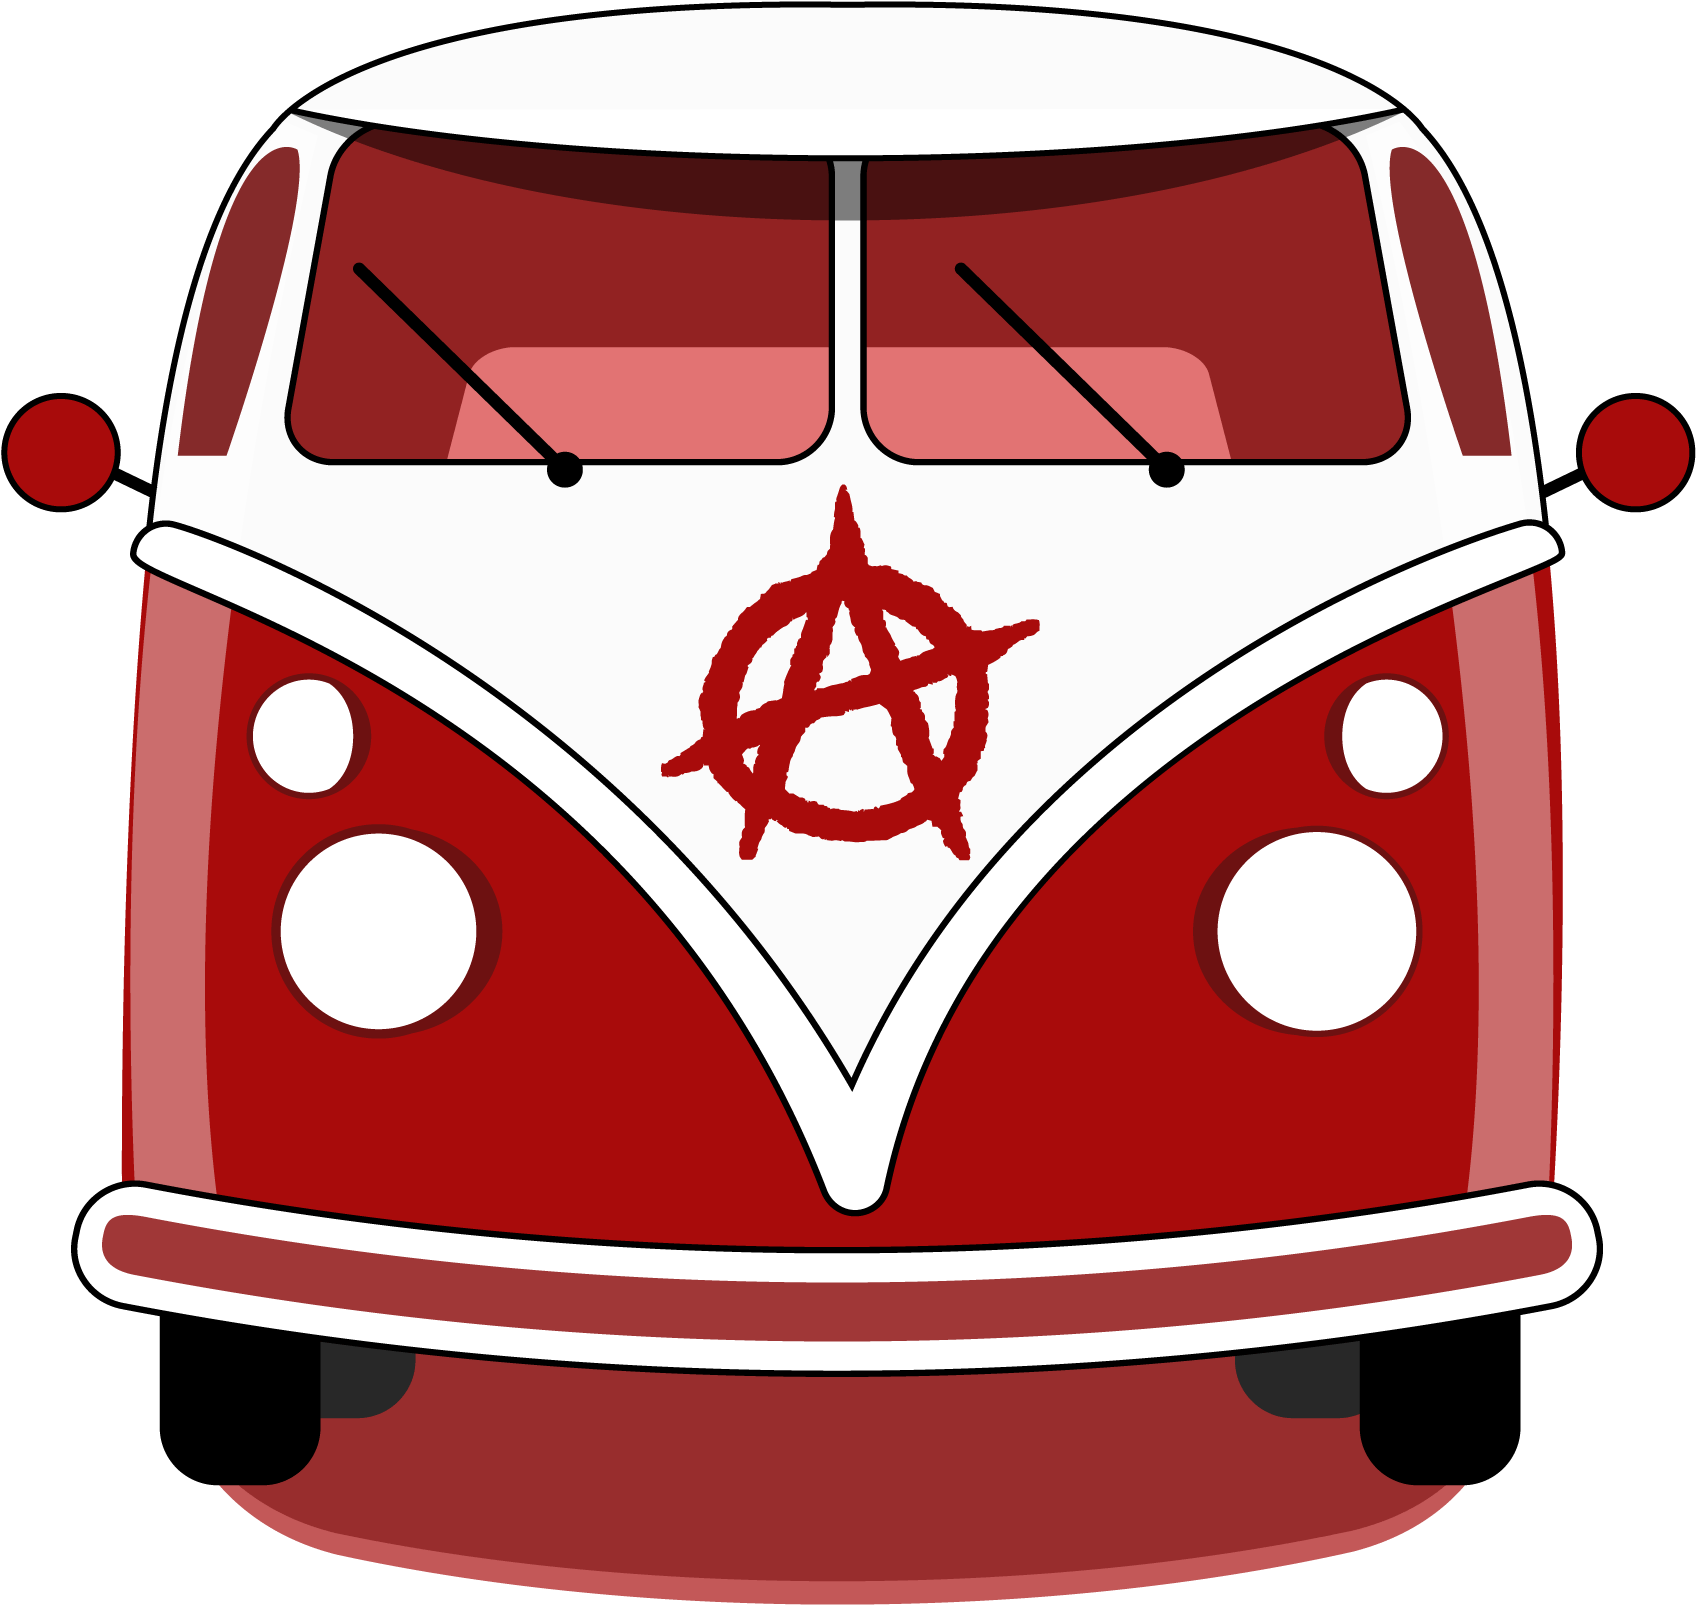 Take A Ride On The Anarchy Bus - Anarchist 1 (red) Throw Blanket (1747x1647)